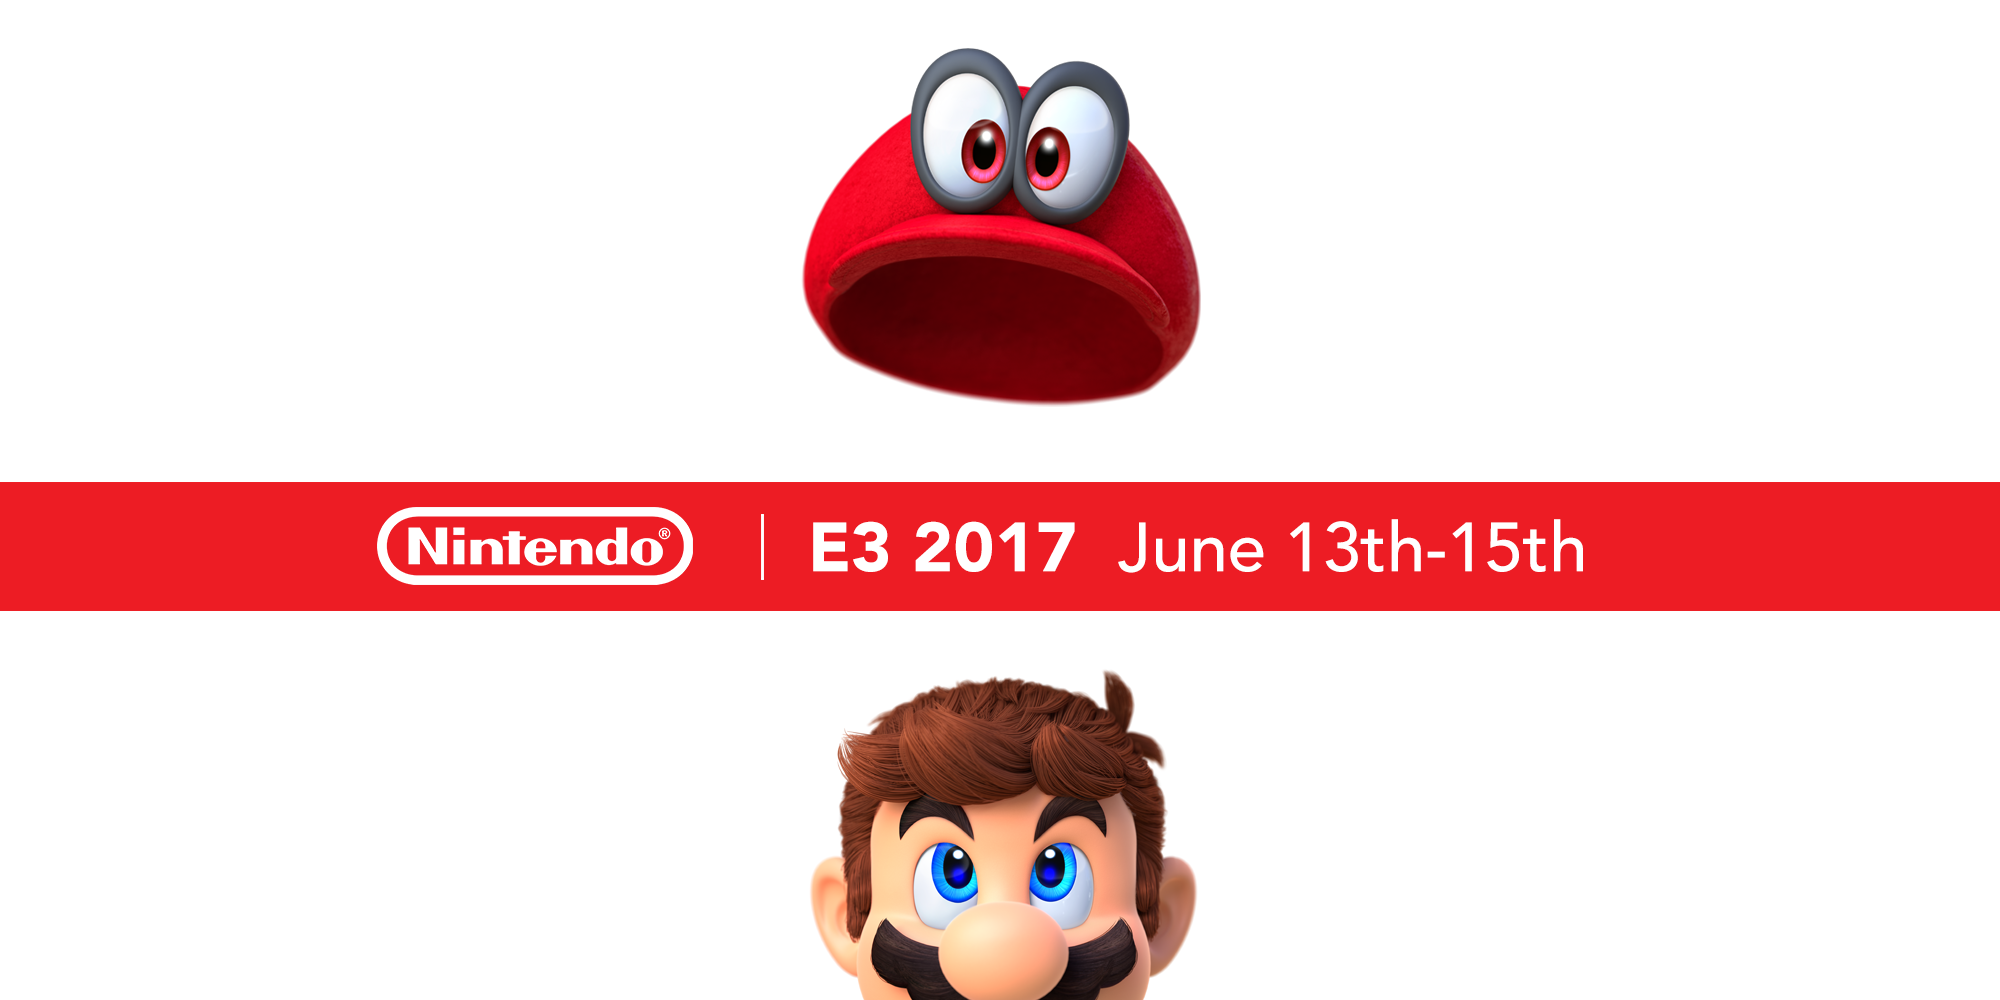 Let's-a-go! Mario, tournaments, and Nintendo Switch head to E3 2017!